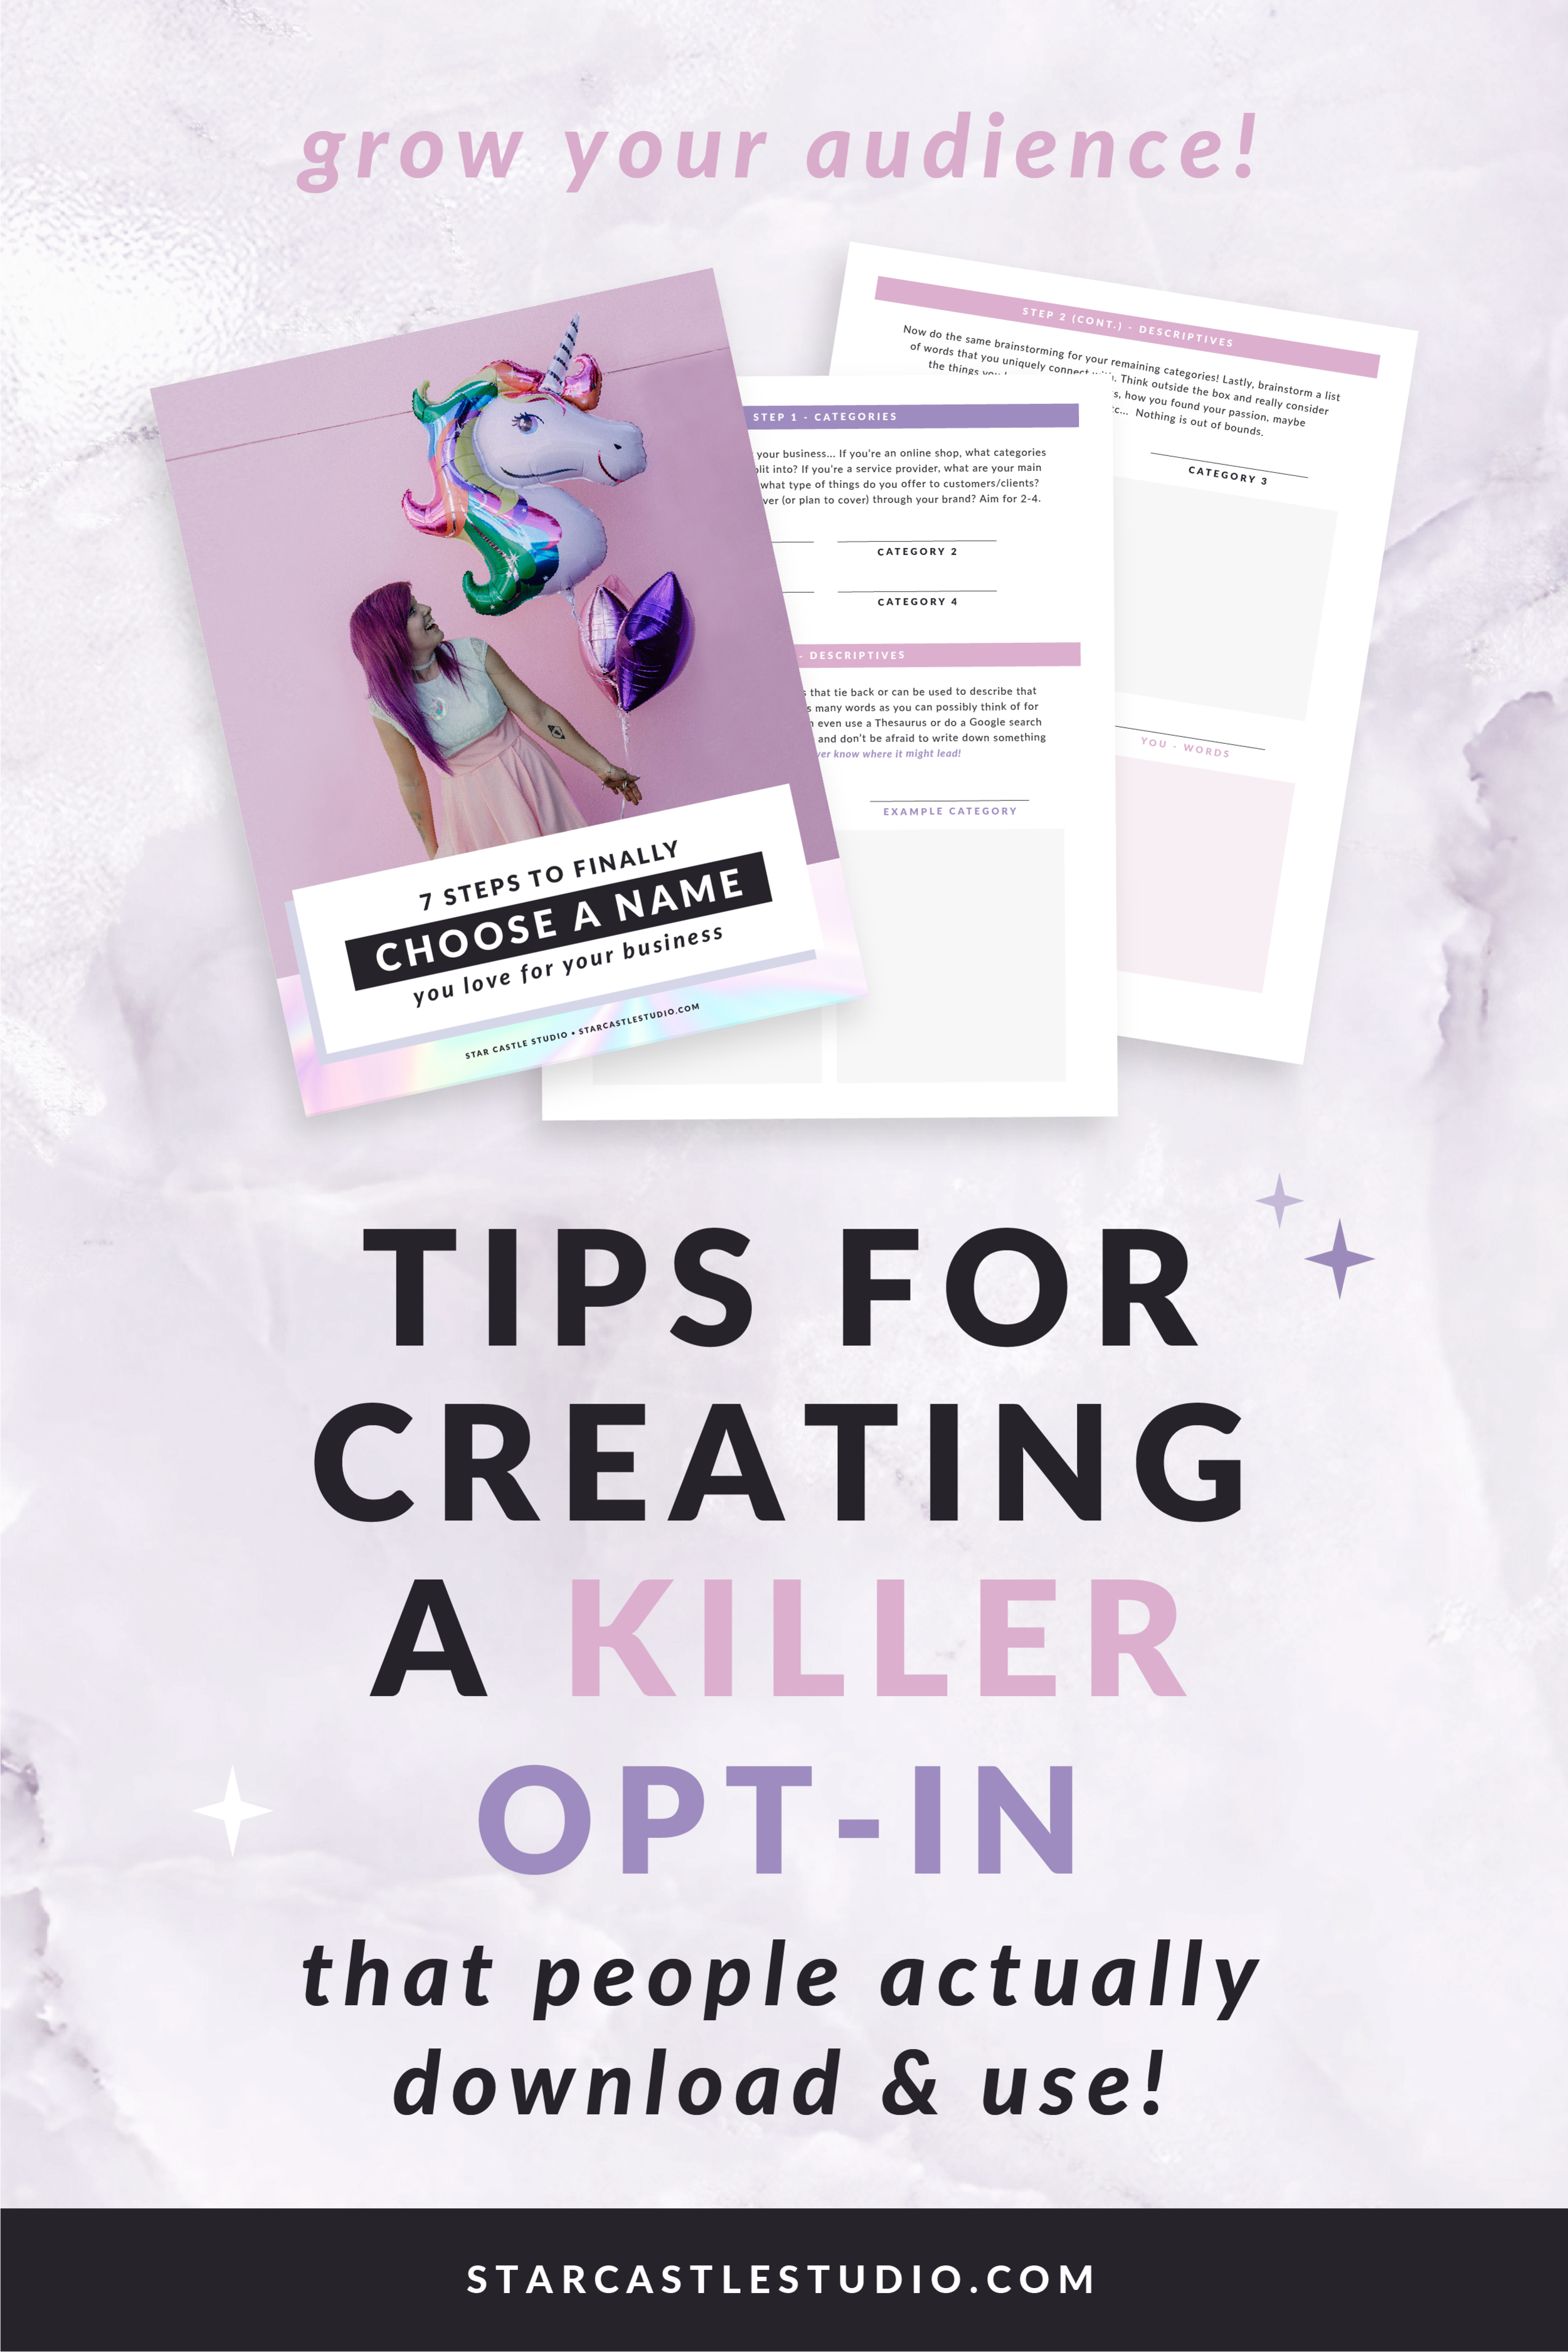 25 Creative Opt-in Freebie Ideas That'll Help You Create Your Own